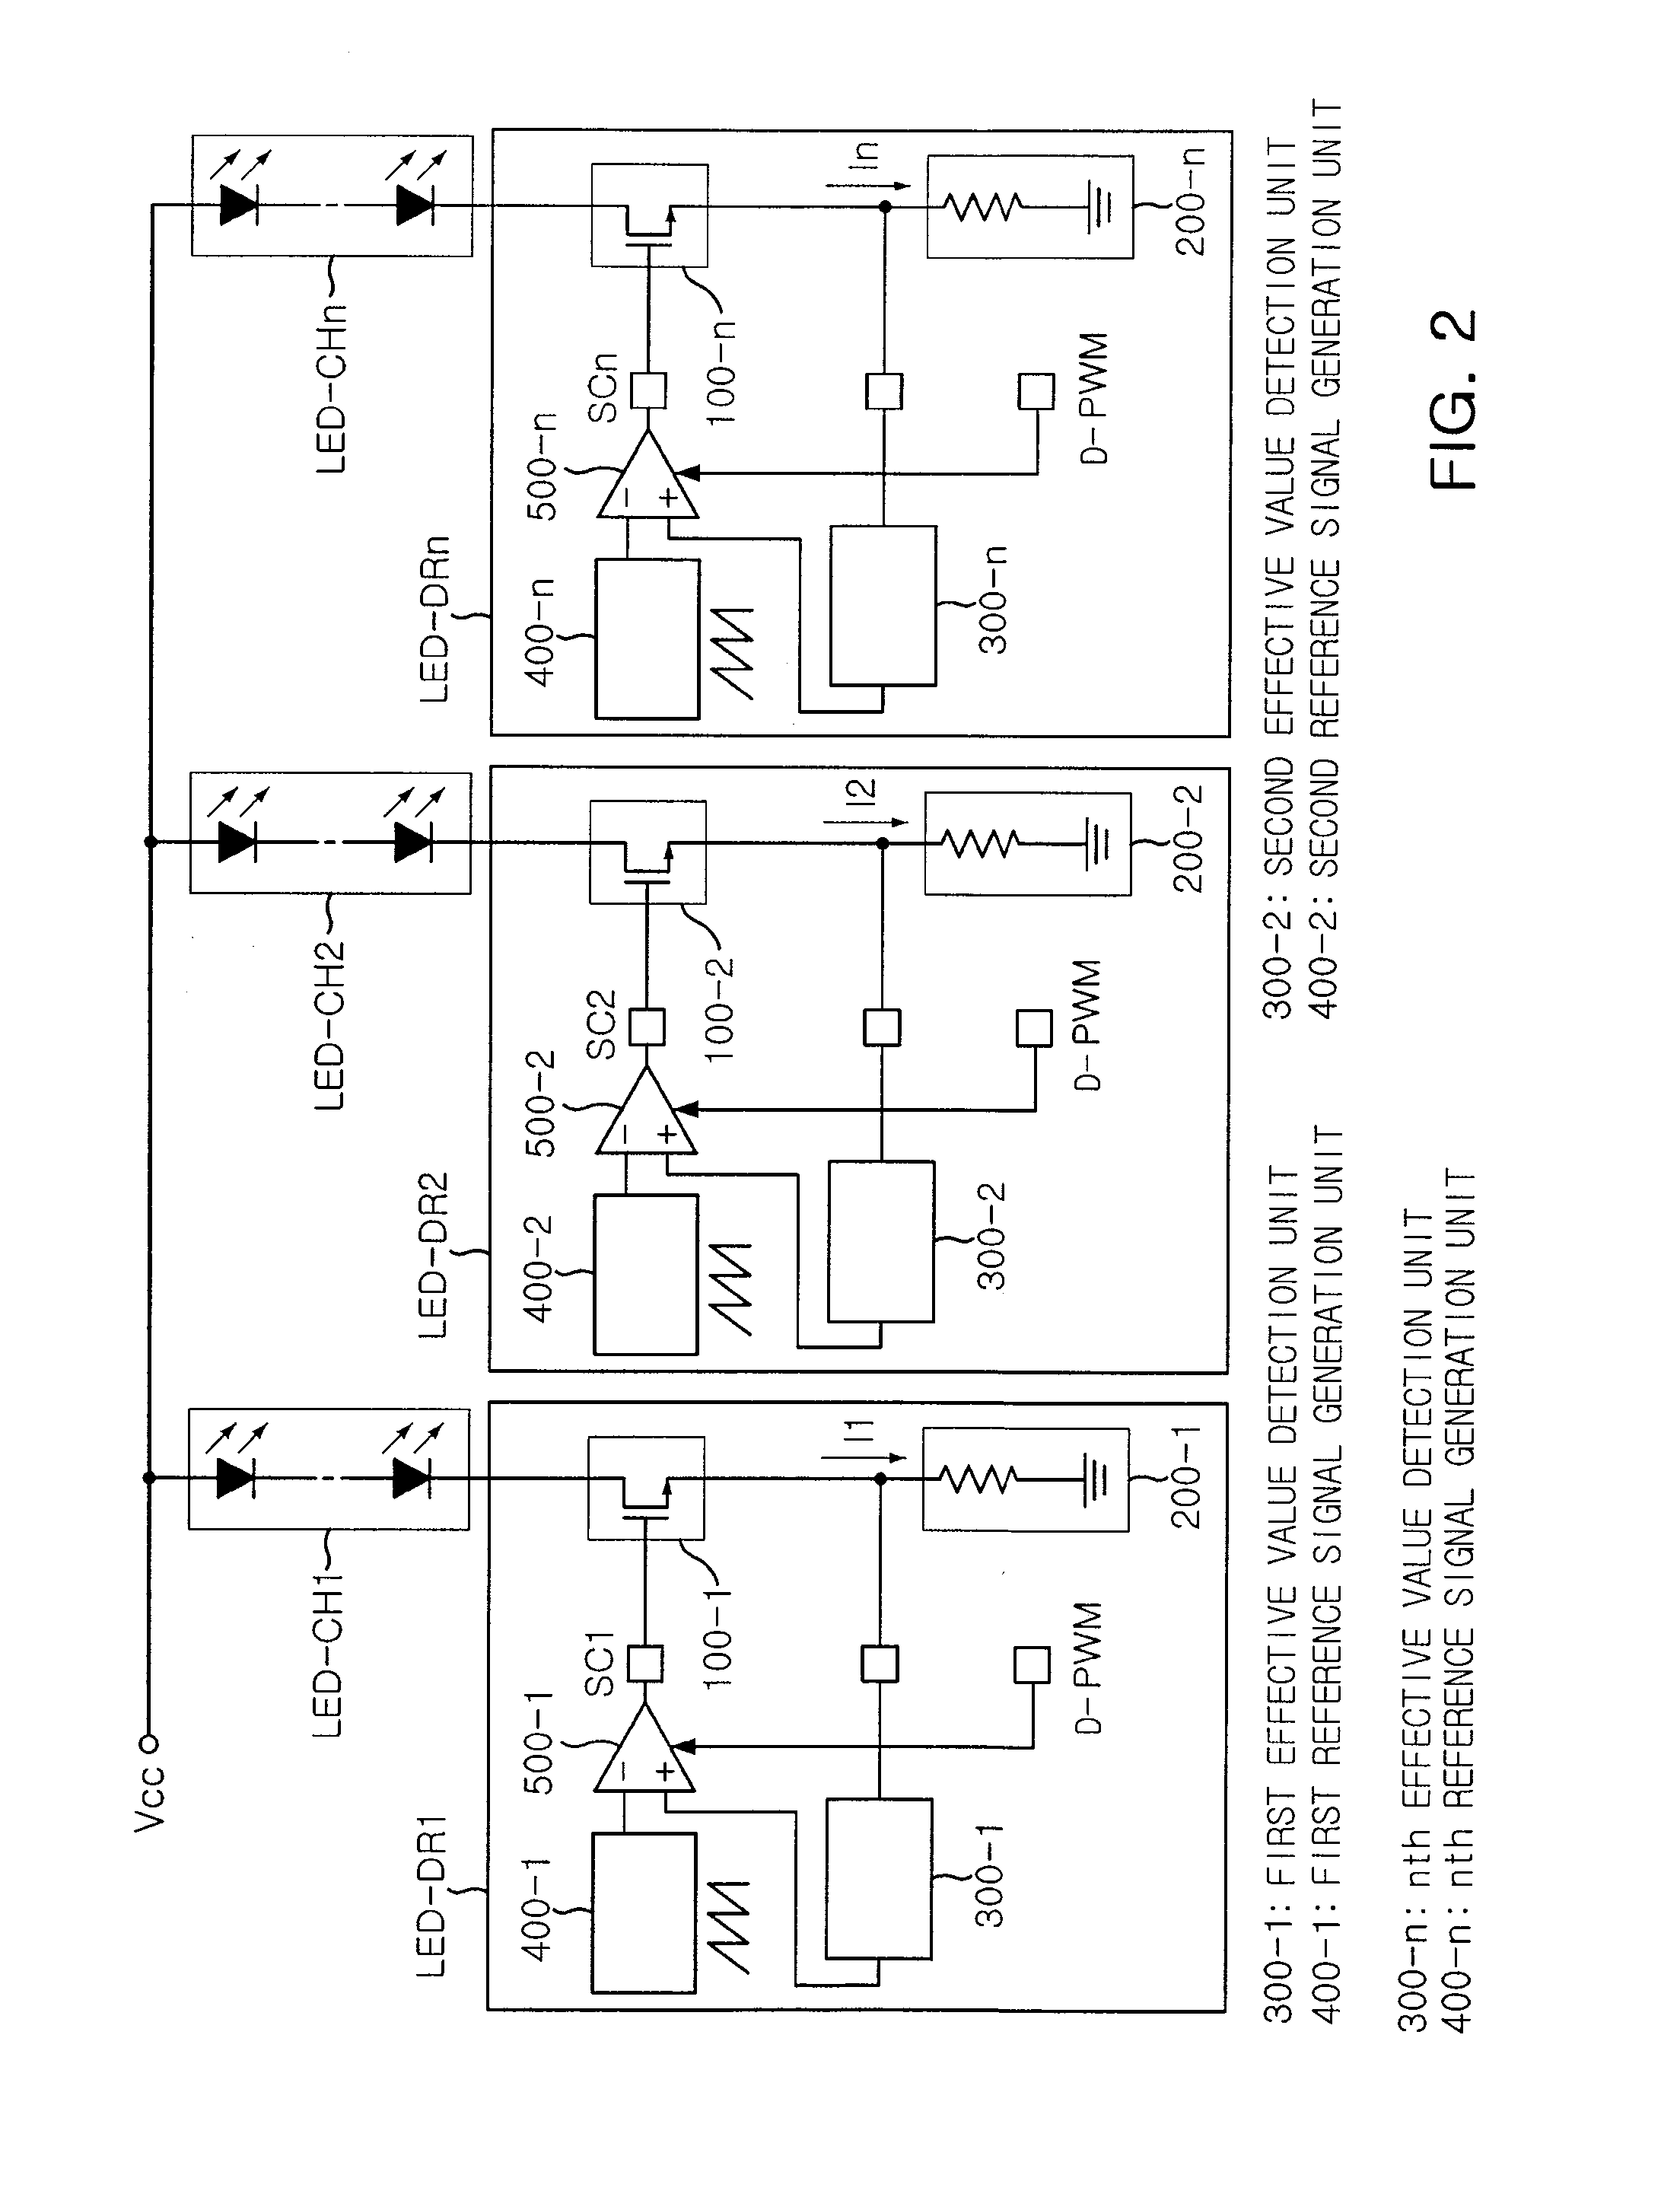 Apparatus for driving light emitting device using pulse-width modulation